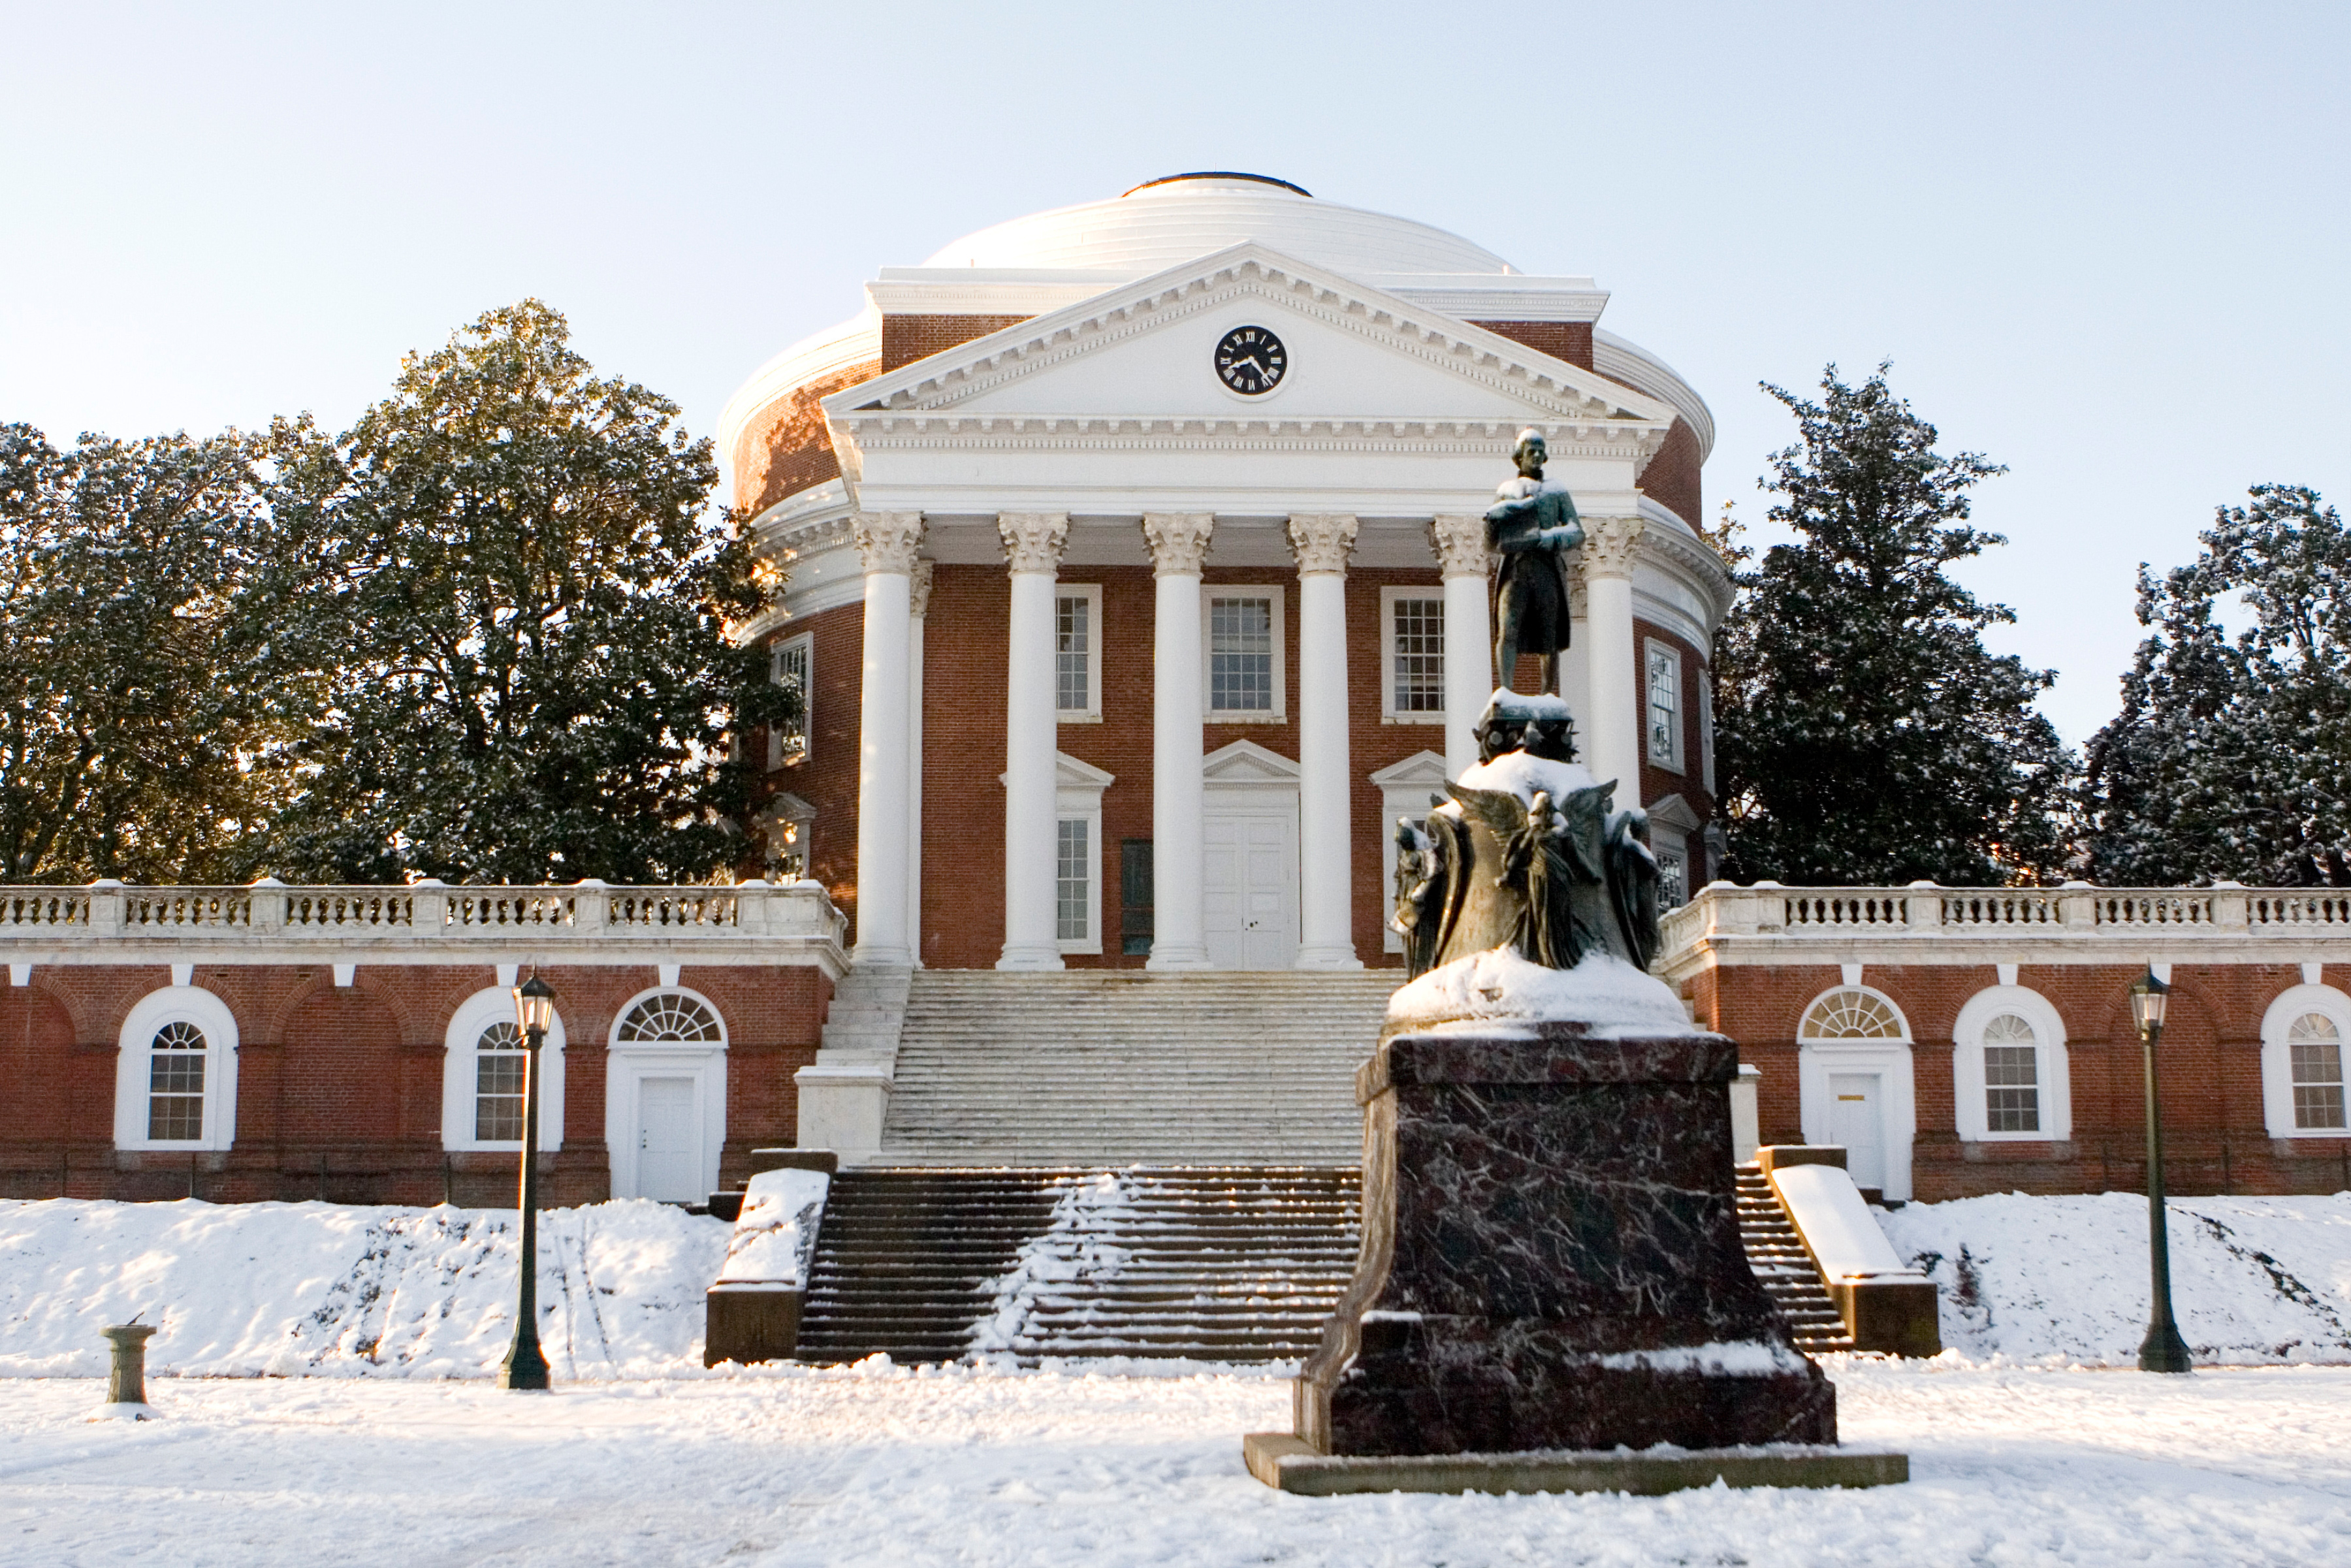 The Rotunda and Thomas Jefferson statue covered in snow